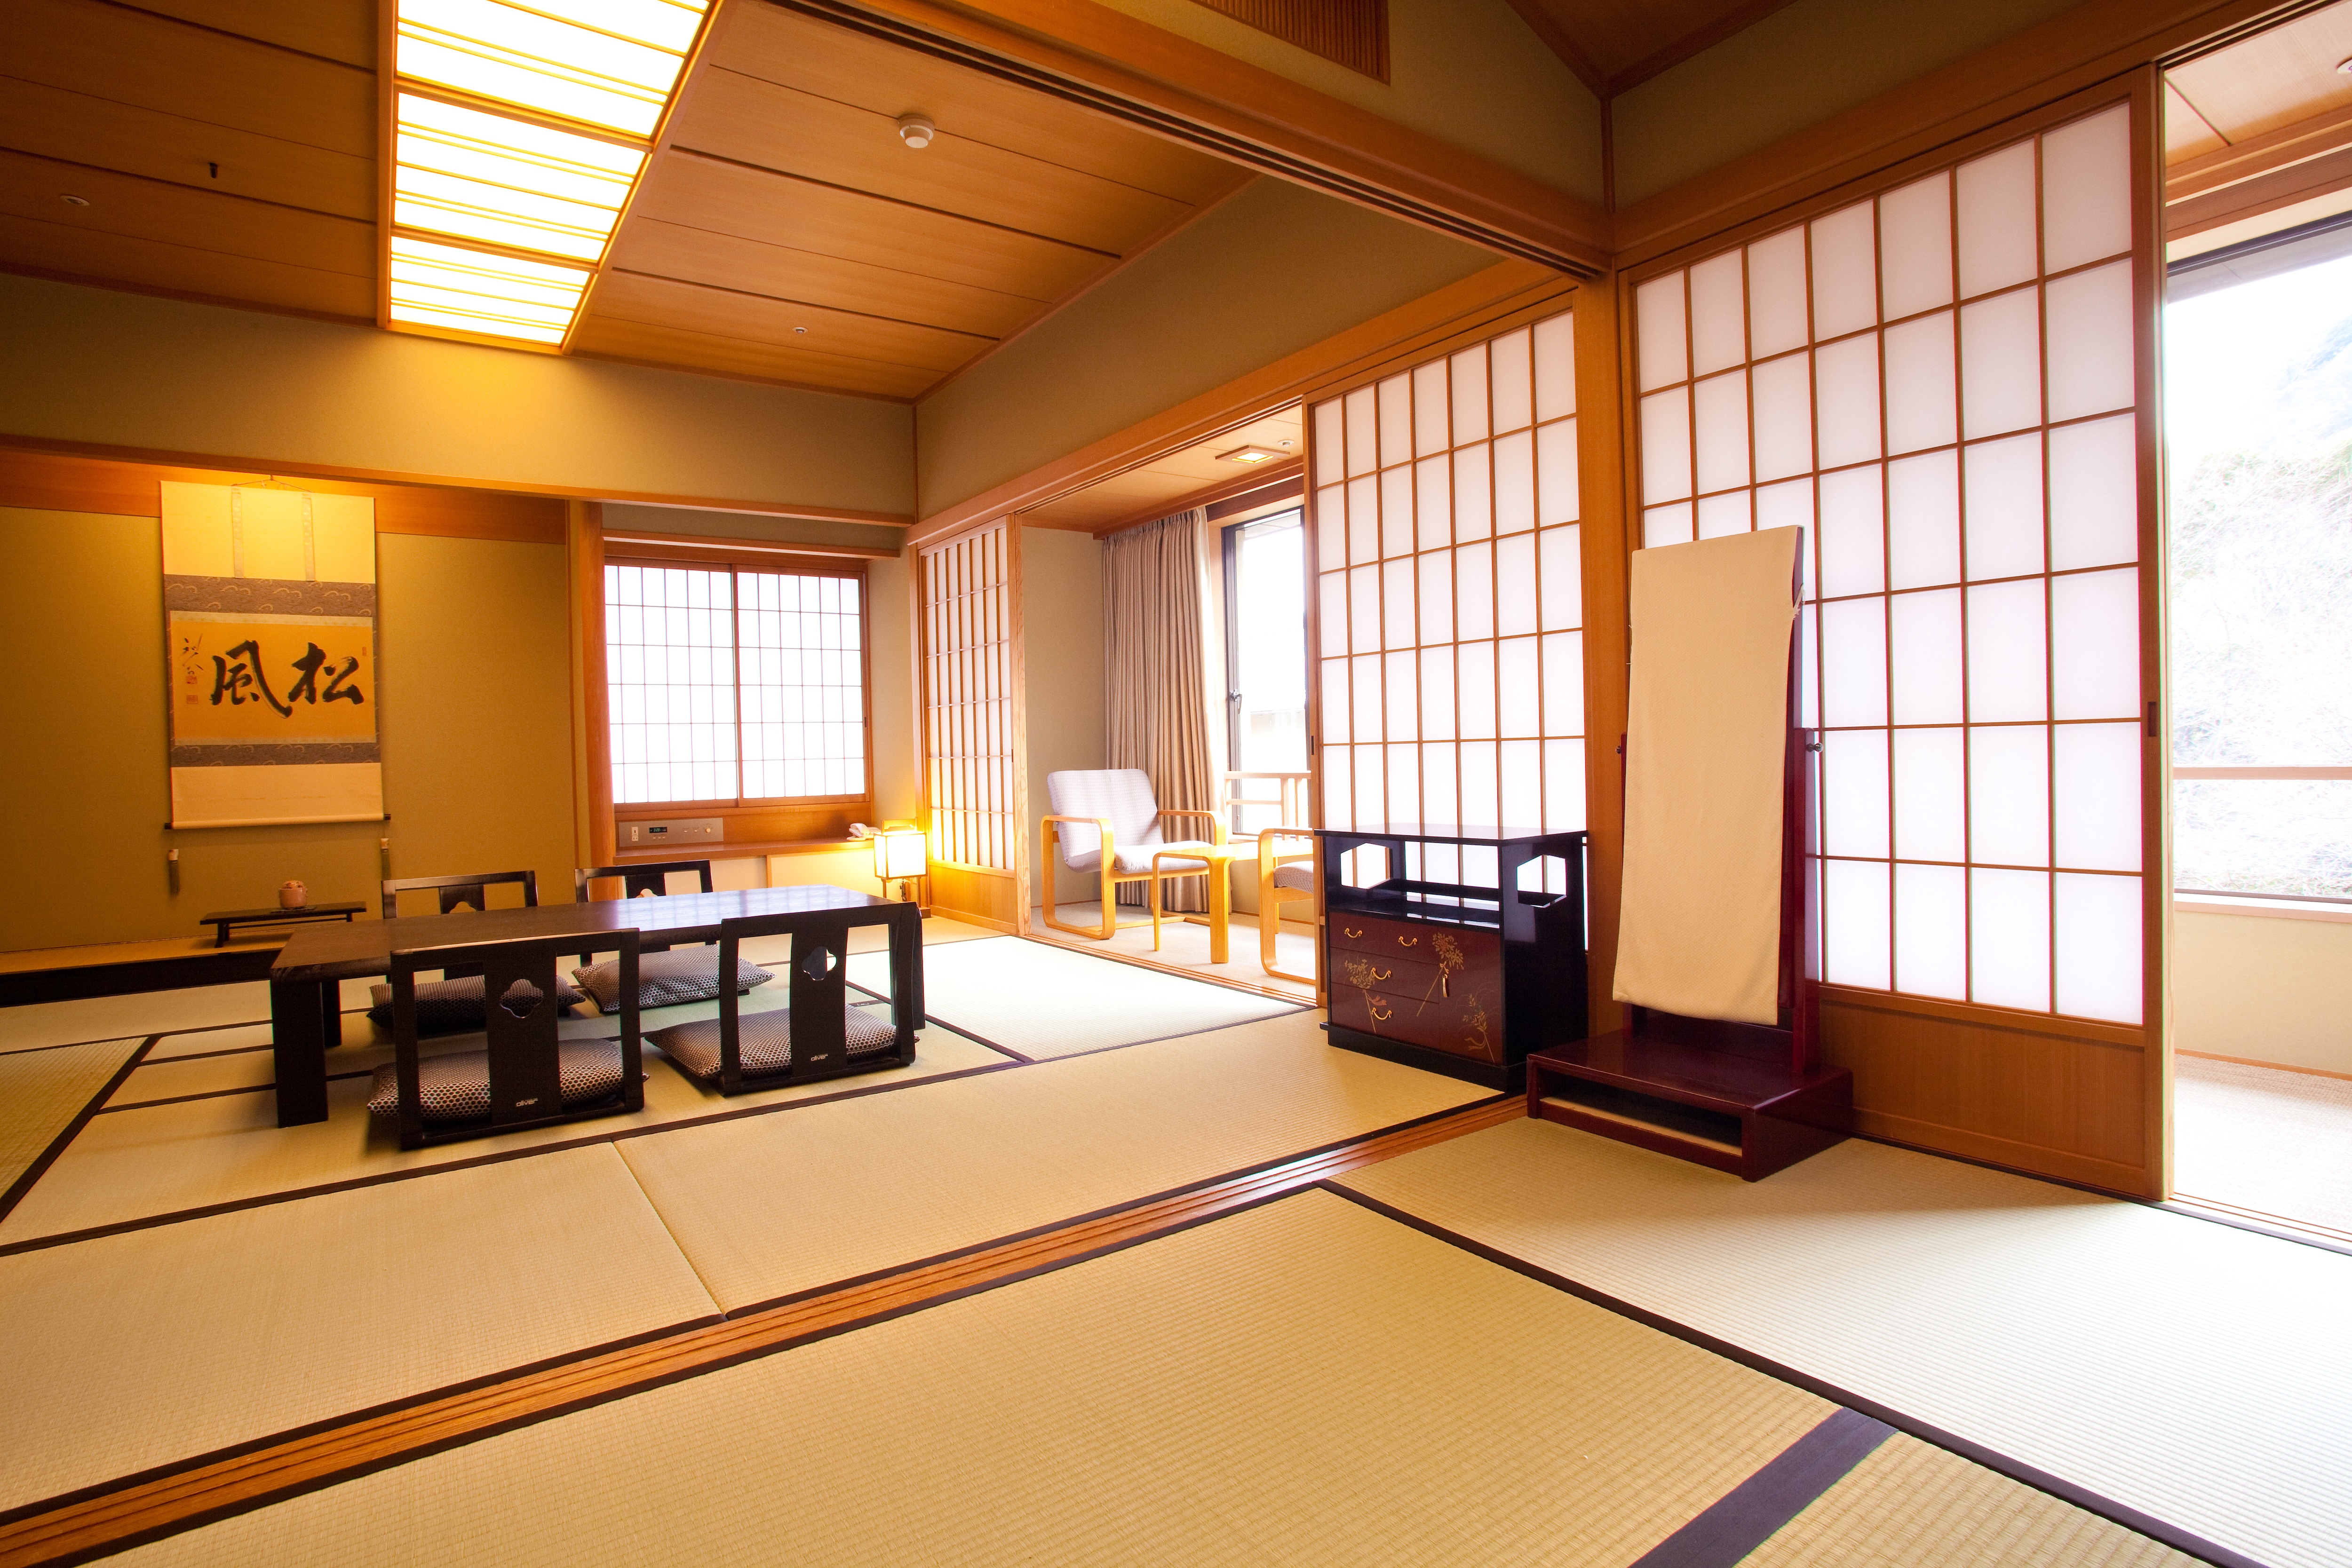 A larger Japanese-style room with 14 tatami mats, 8 tatami mats + 6 tatami mats. It can accommodate up to 7 people.